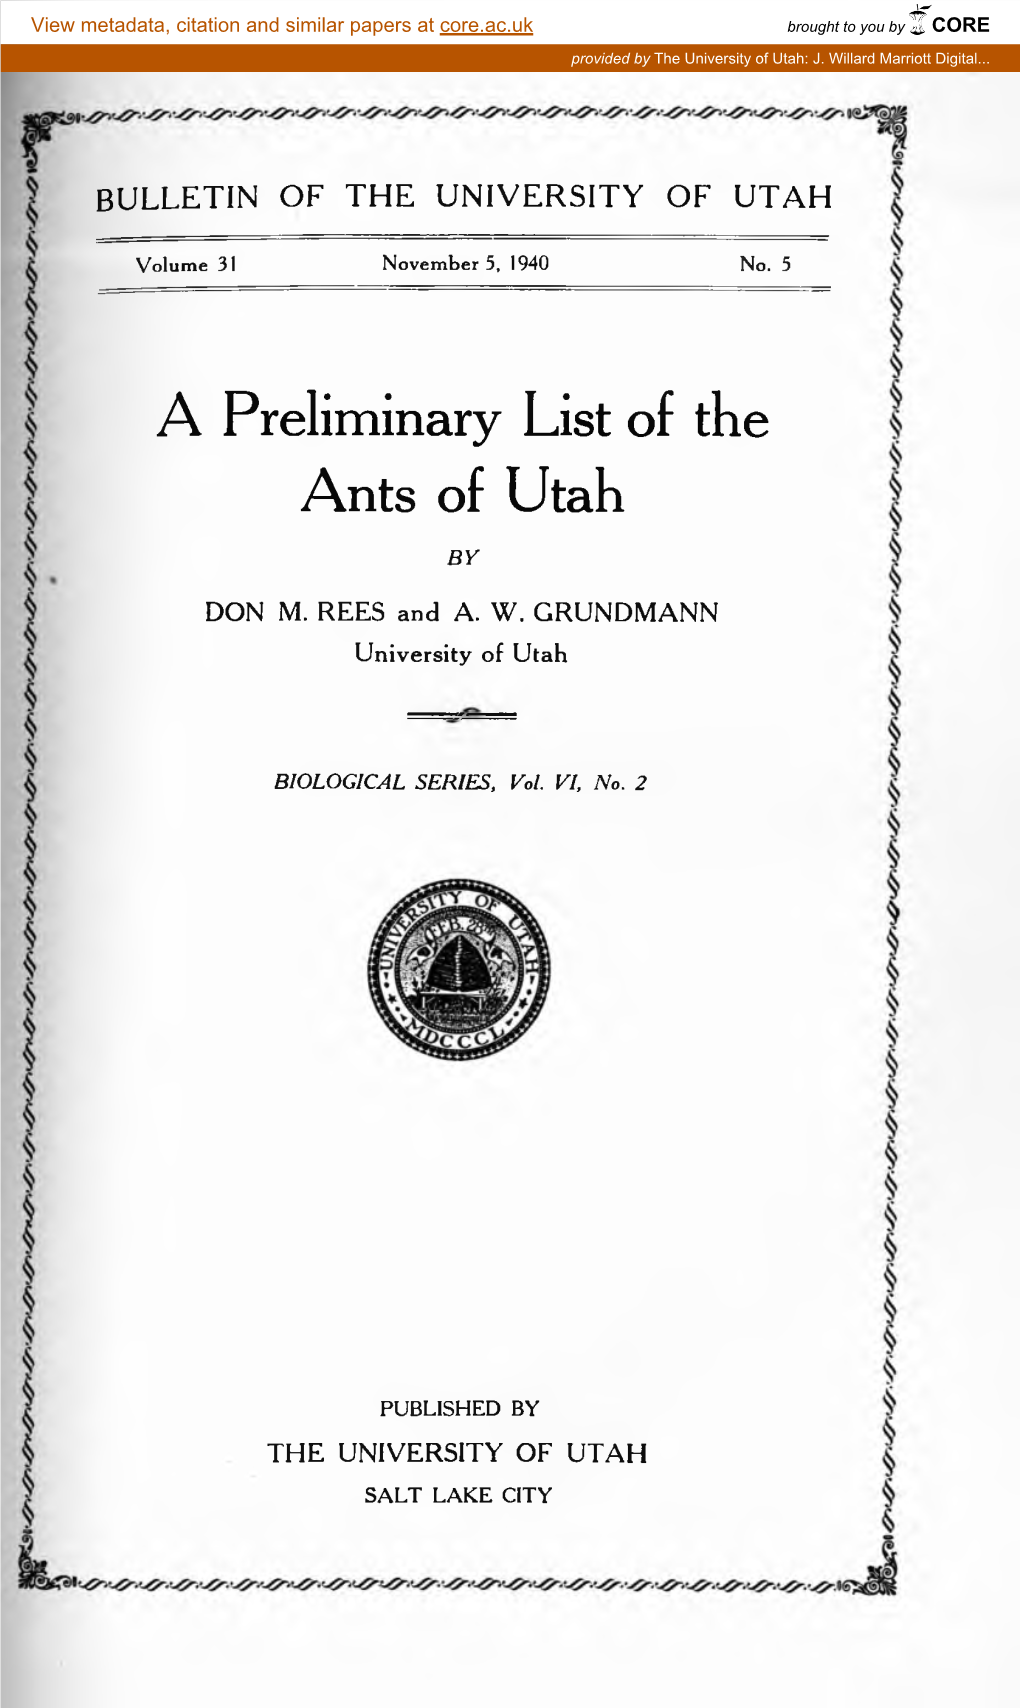 A Preliminary List of the Ants of Utah